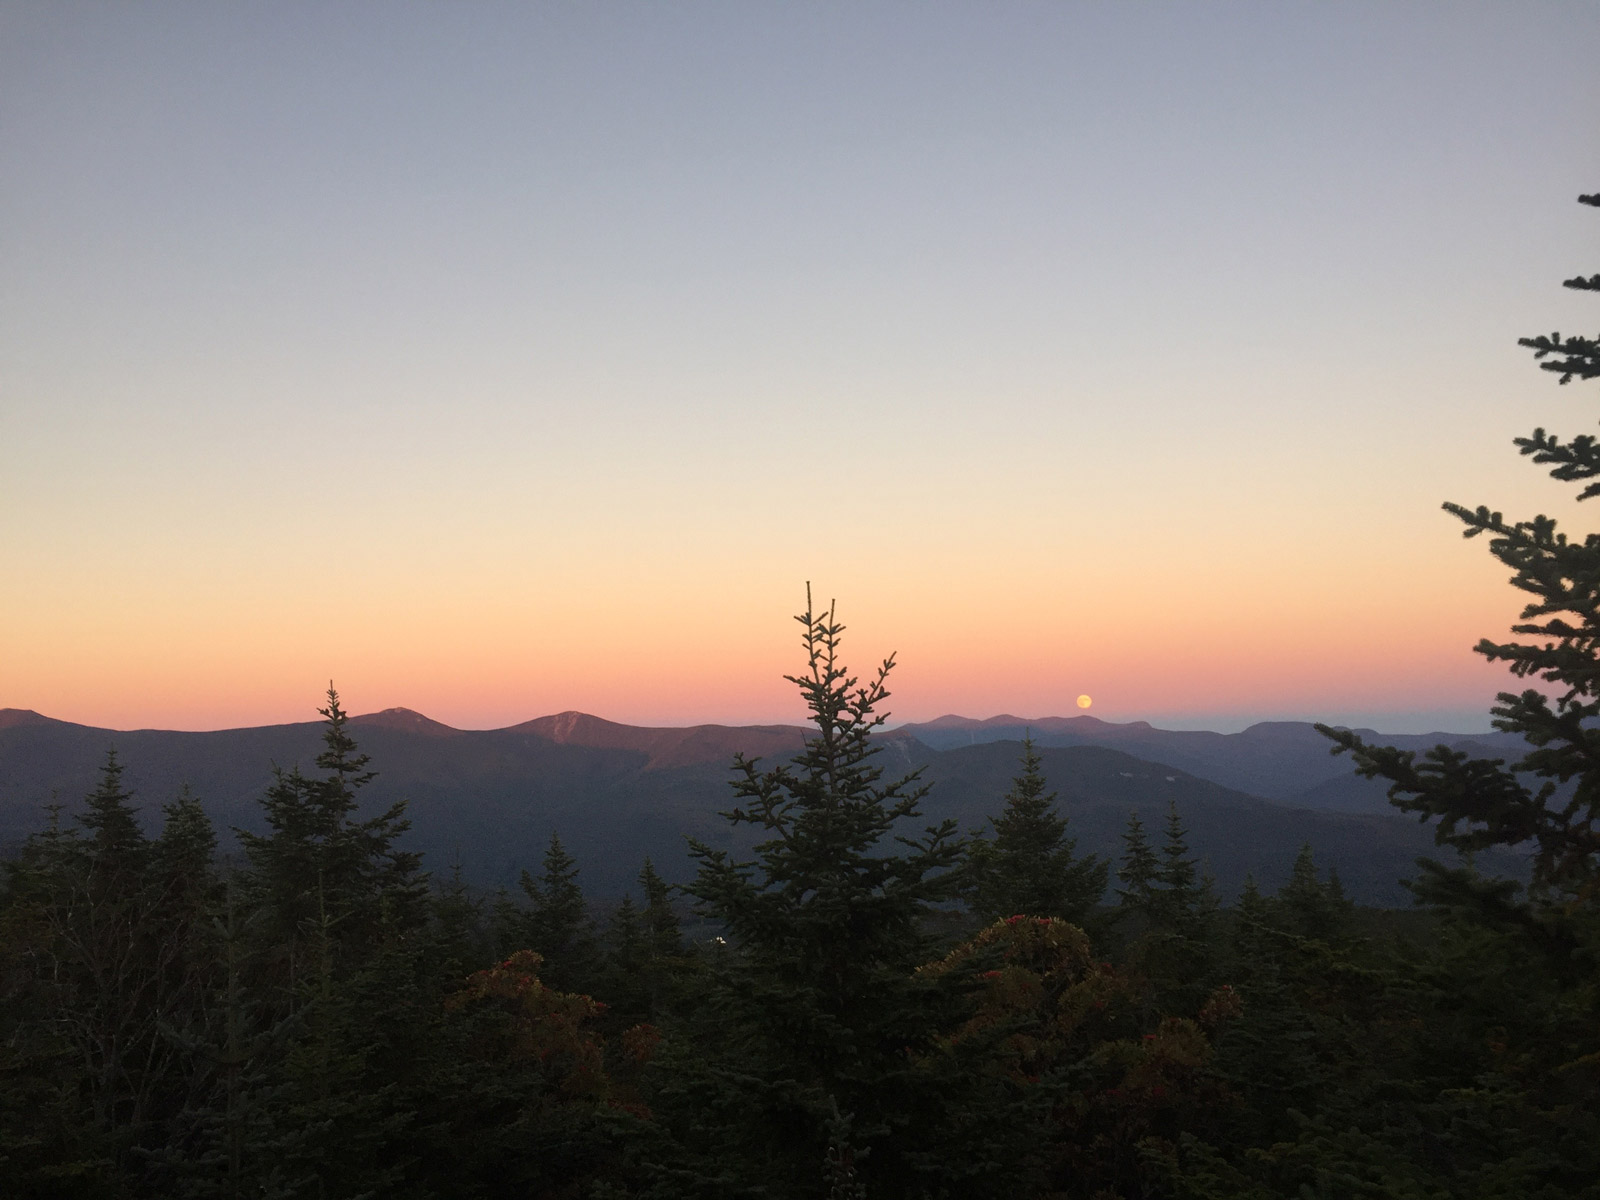 A supermoon over Franconia Ridge, White Mountains, New Hampshire - HikerFeed